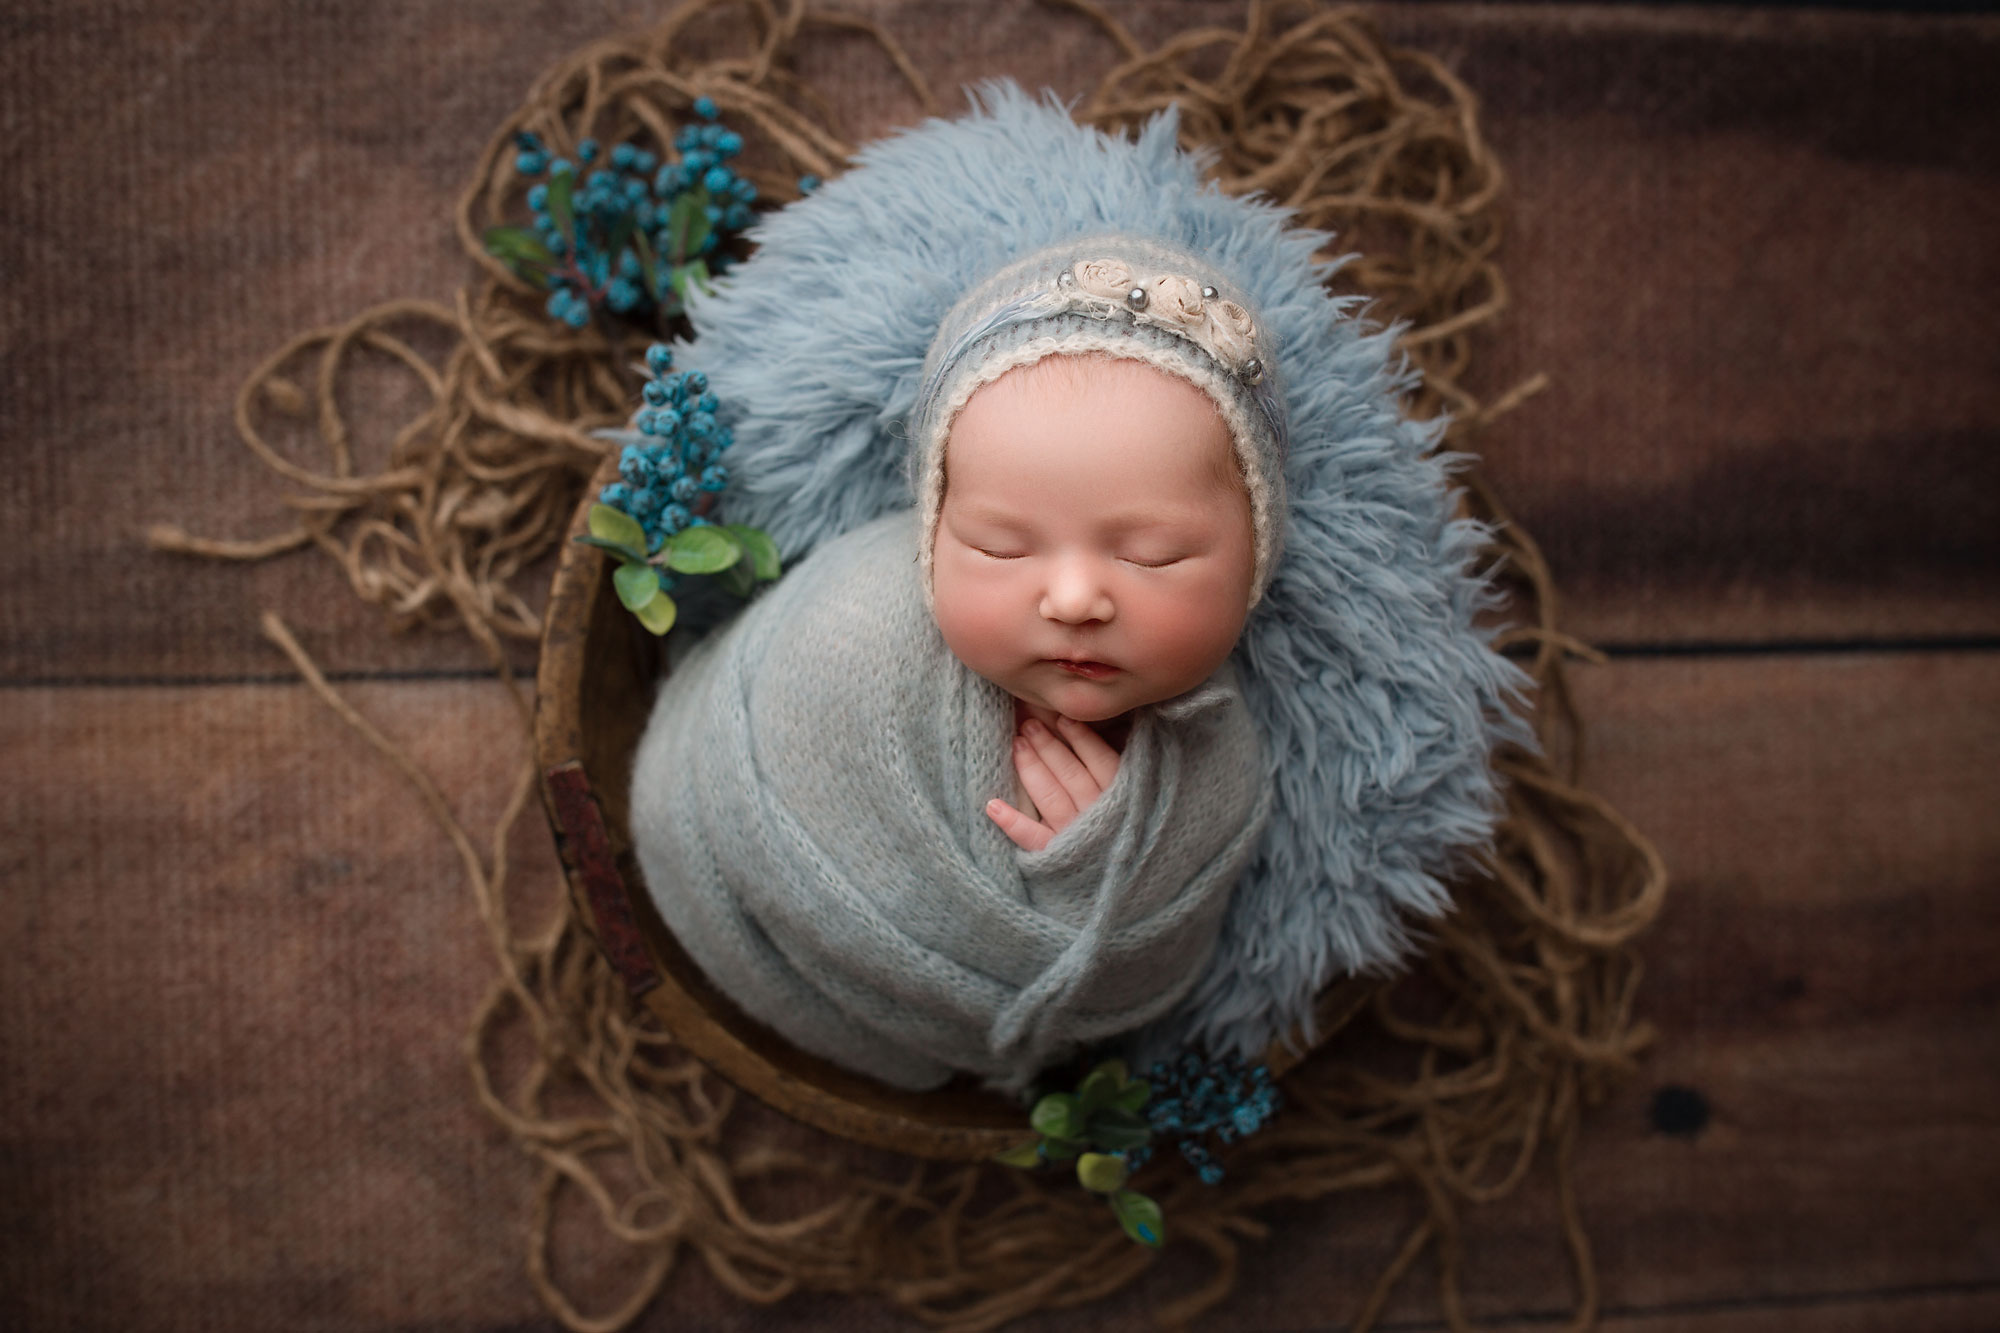 newborn photo ideas for photography session